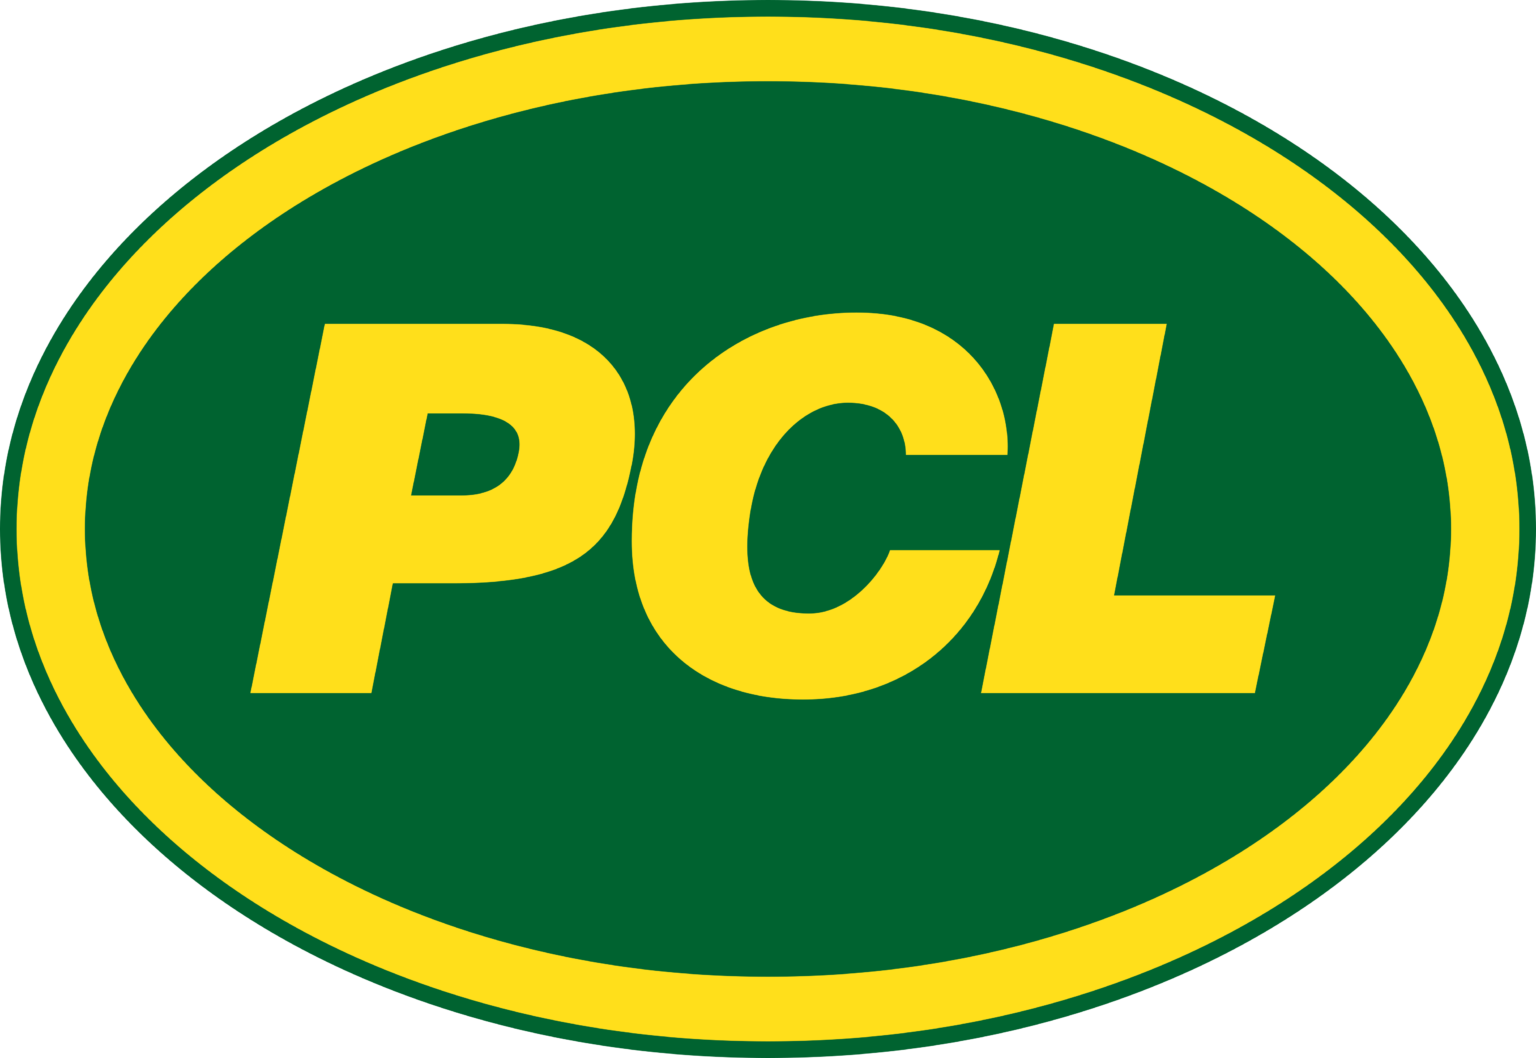 pcl-construction-logos-download